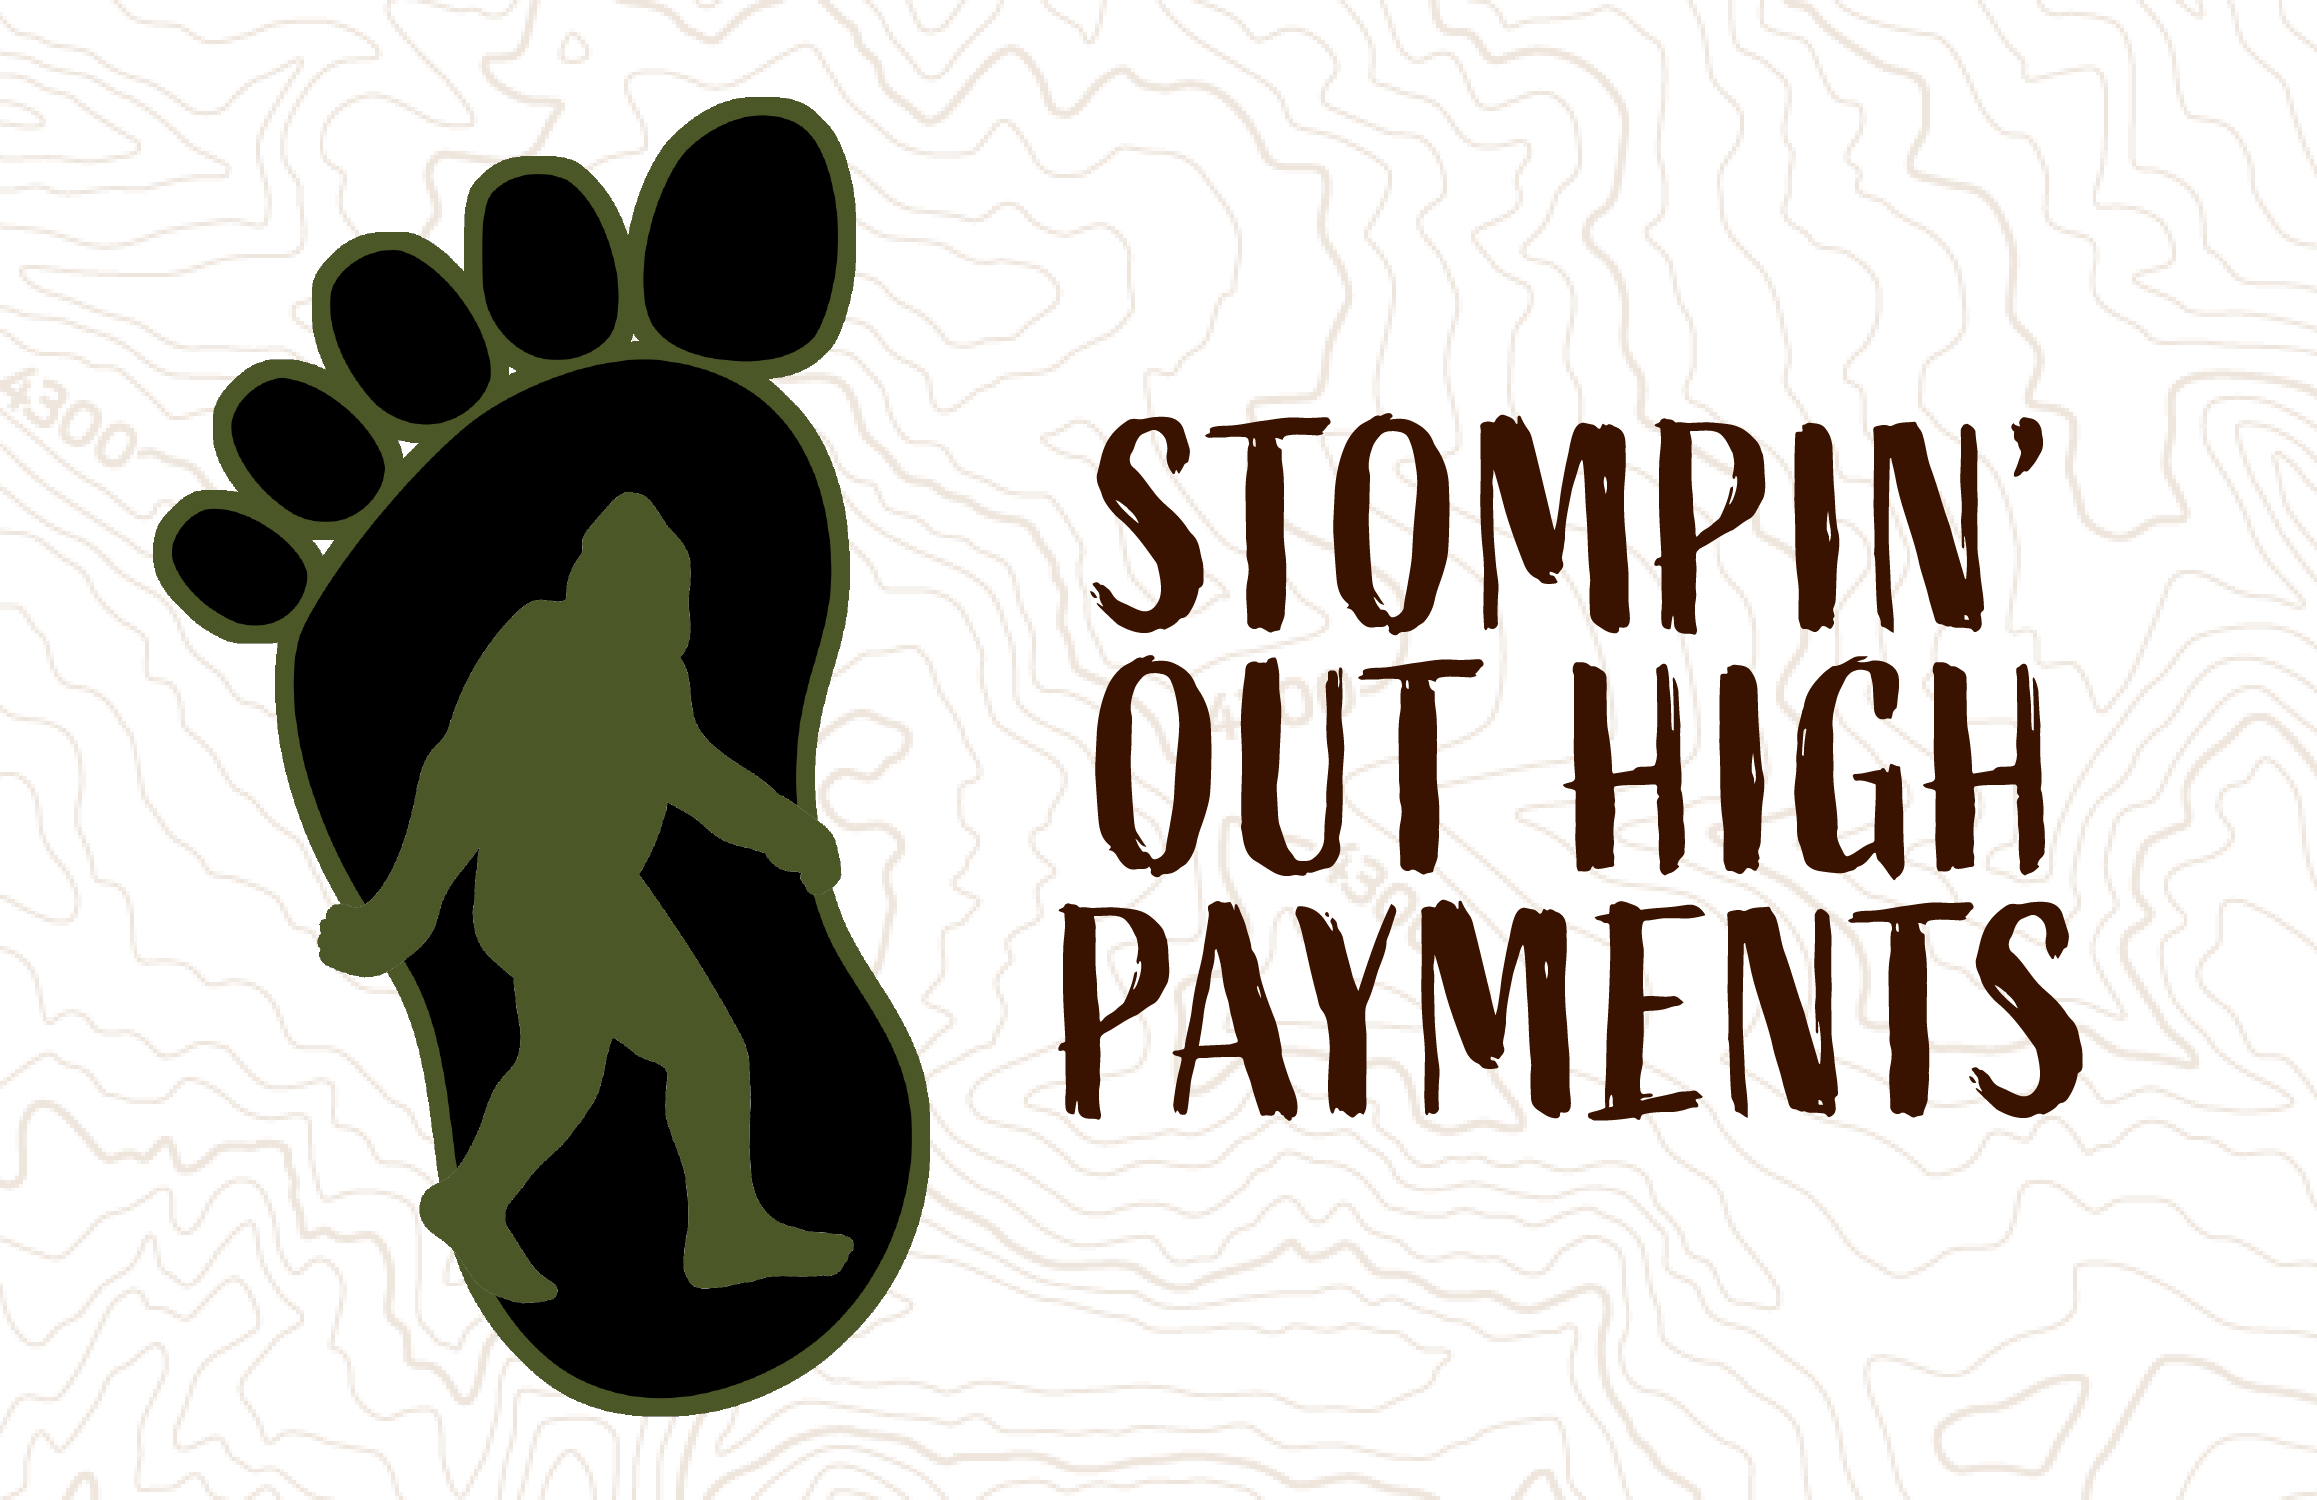 Stompin' Out High Payments